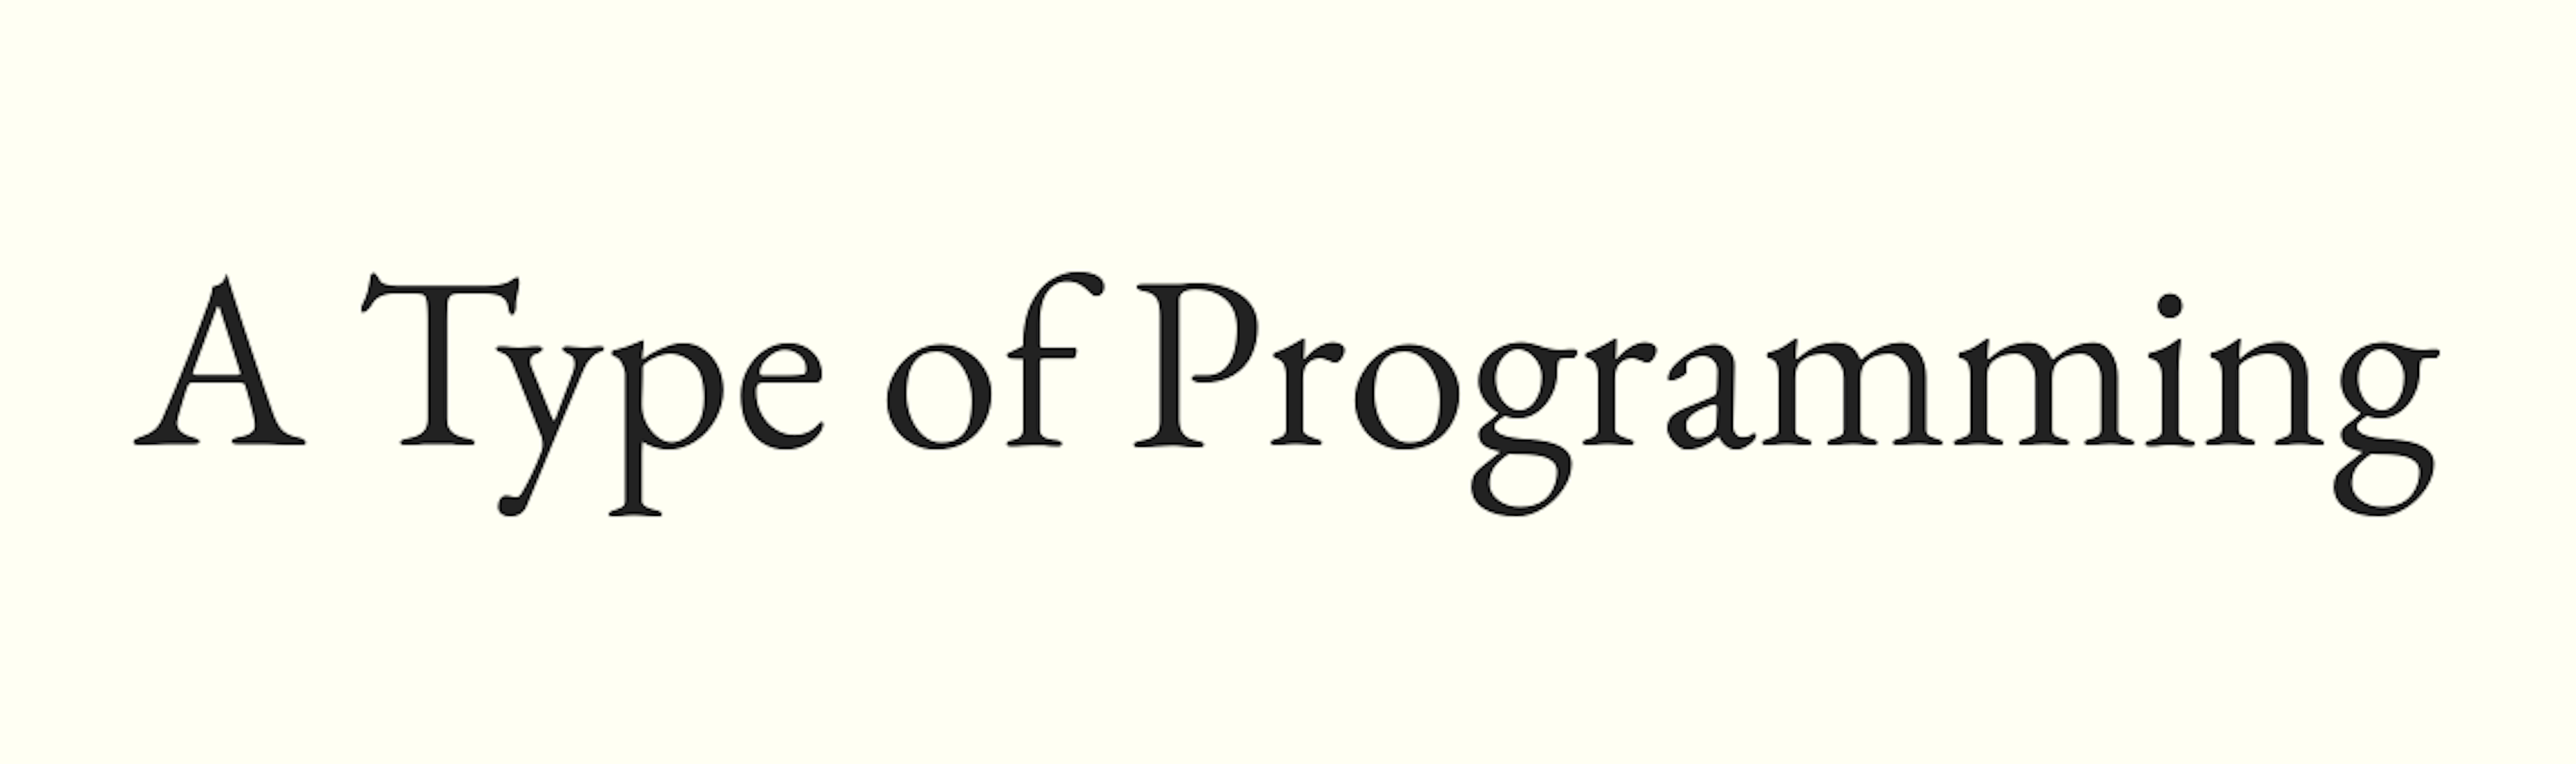 A Type of Programming